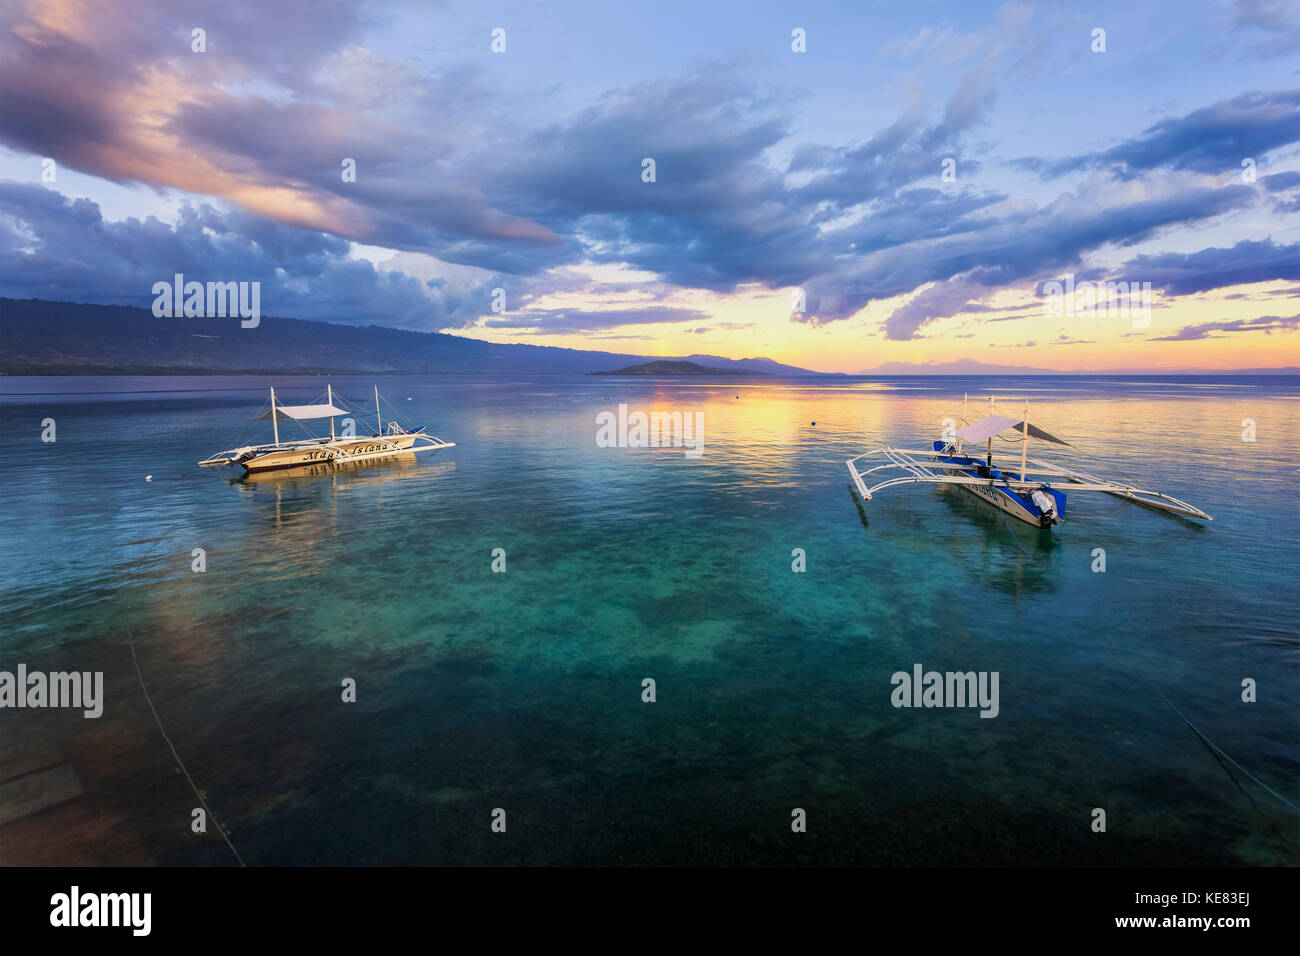 Sunset Over The Ocean With Pump Boats; Moalboal, Cebu, Central Visayas, Philippines Stock Photo